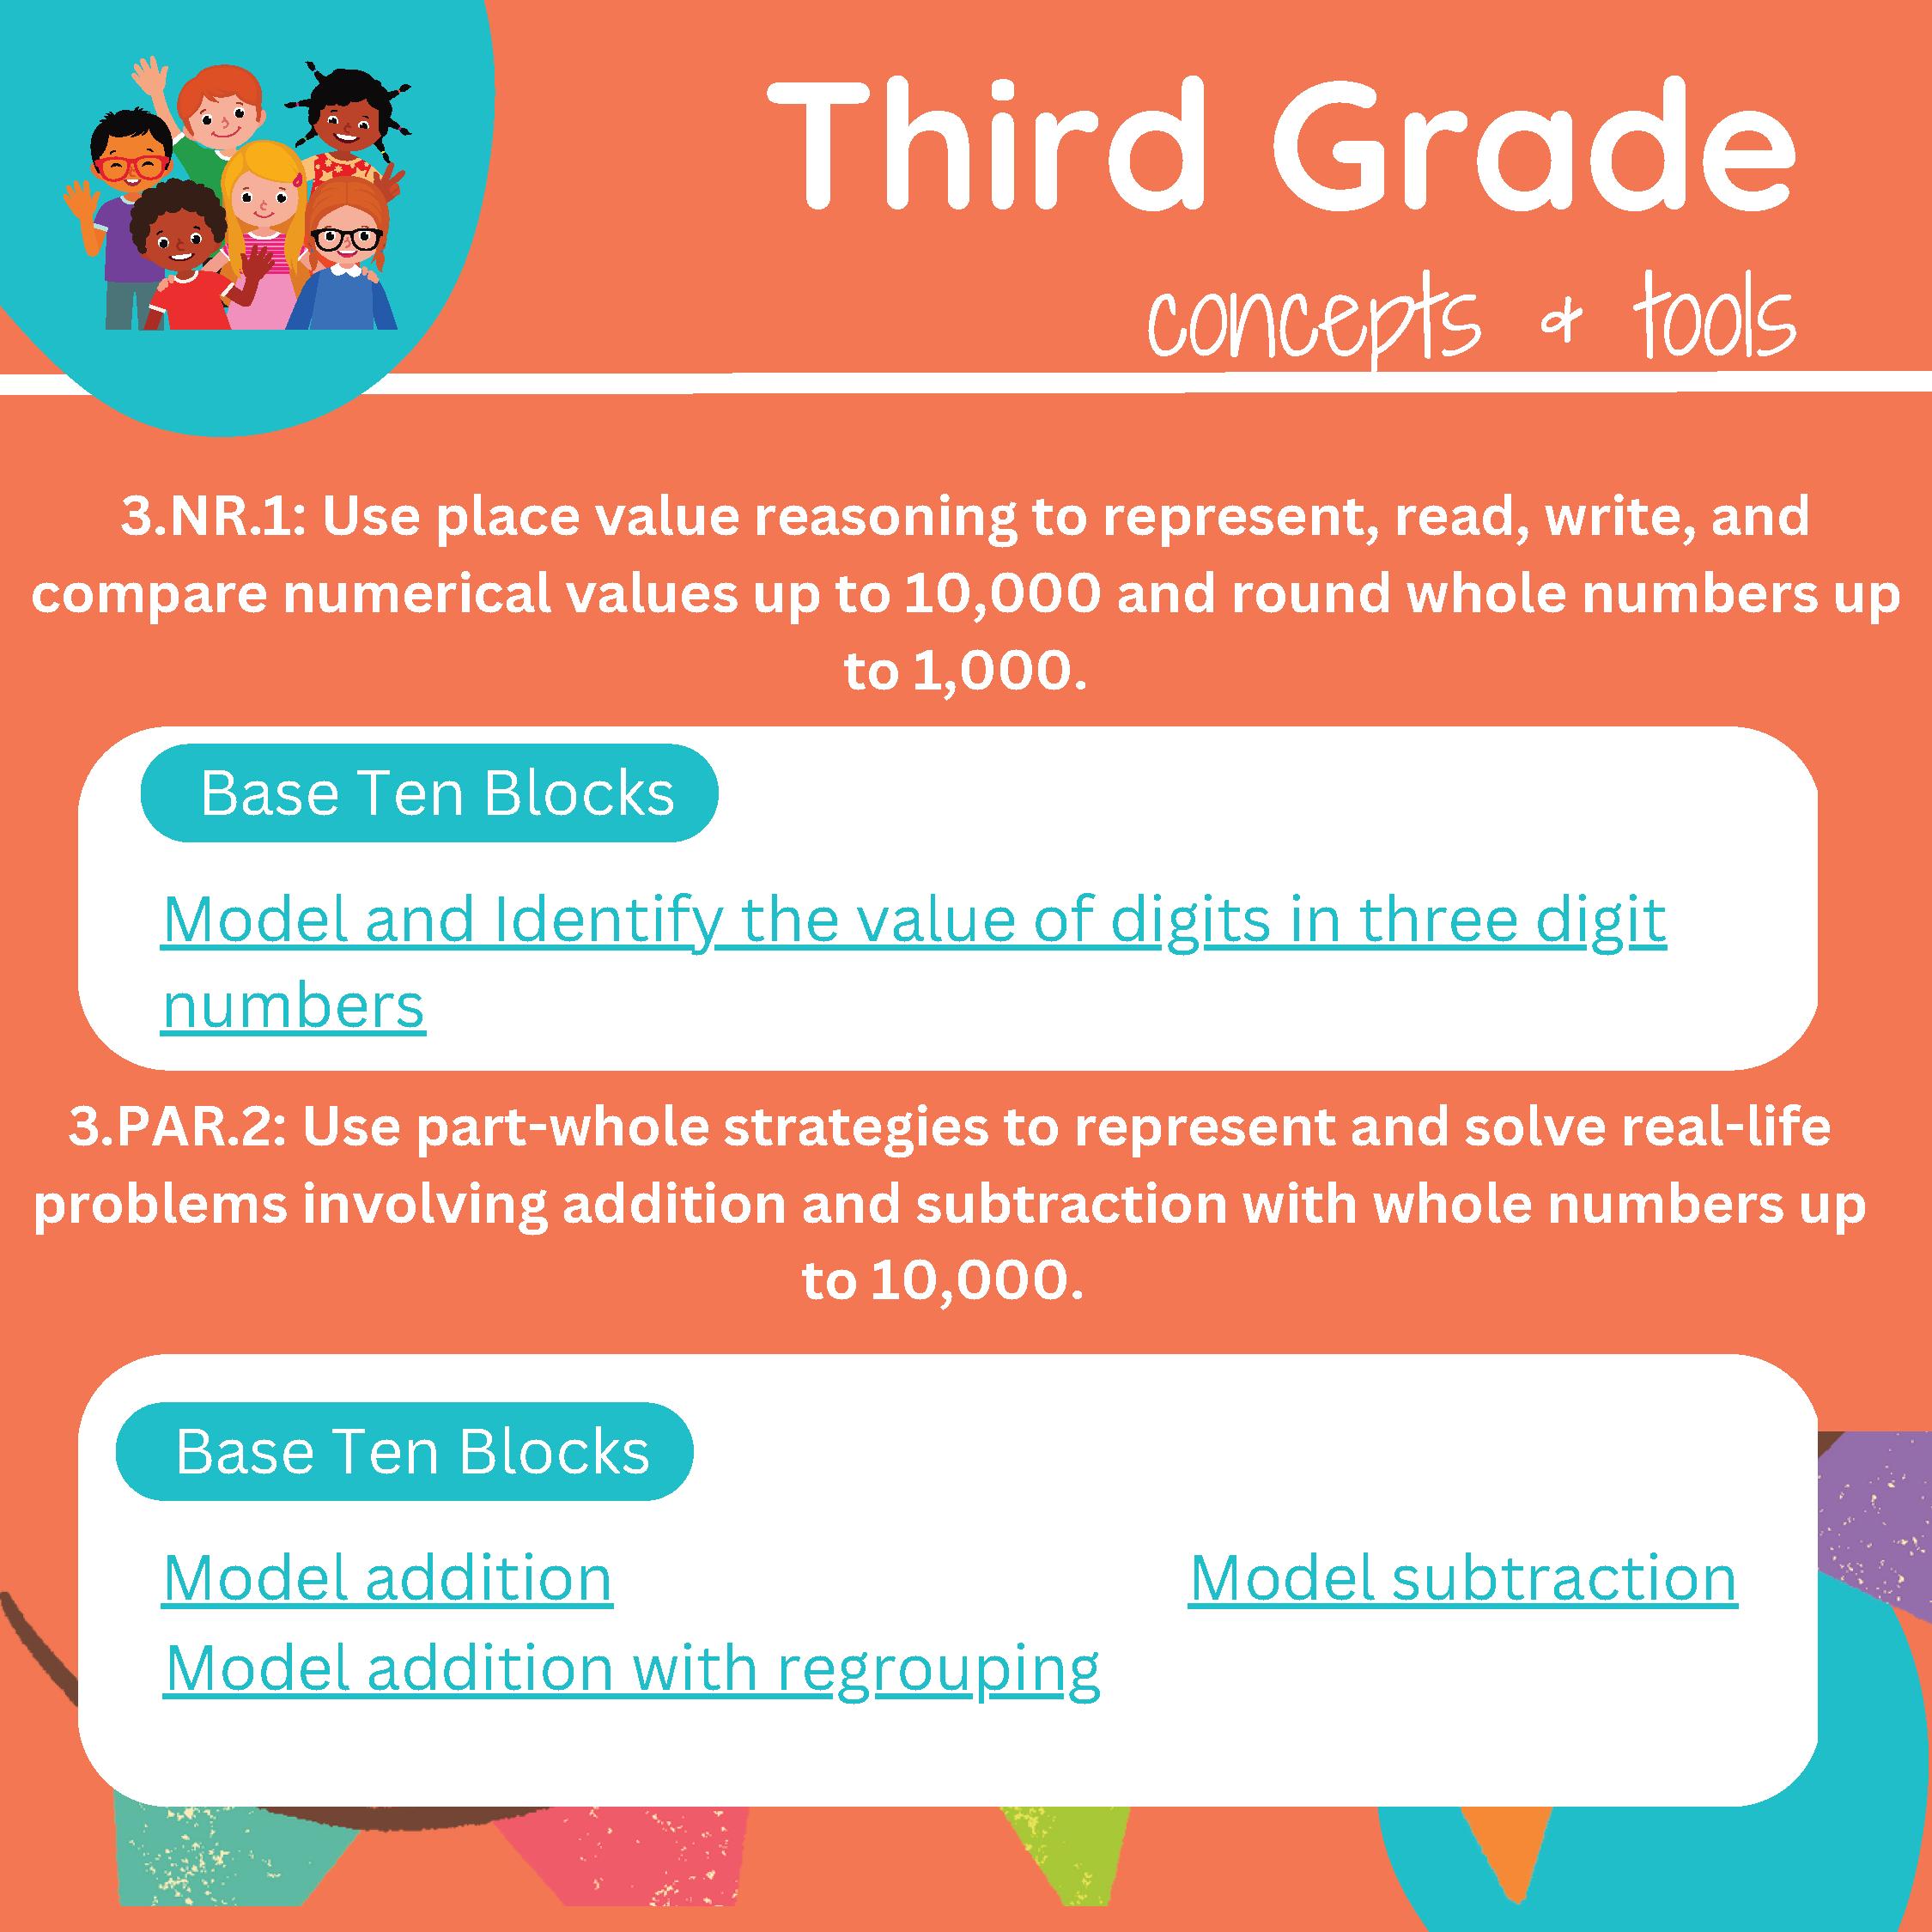 Third Grade concepts and tools_Page_1